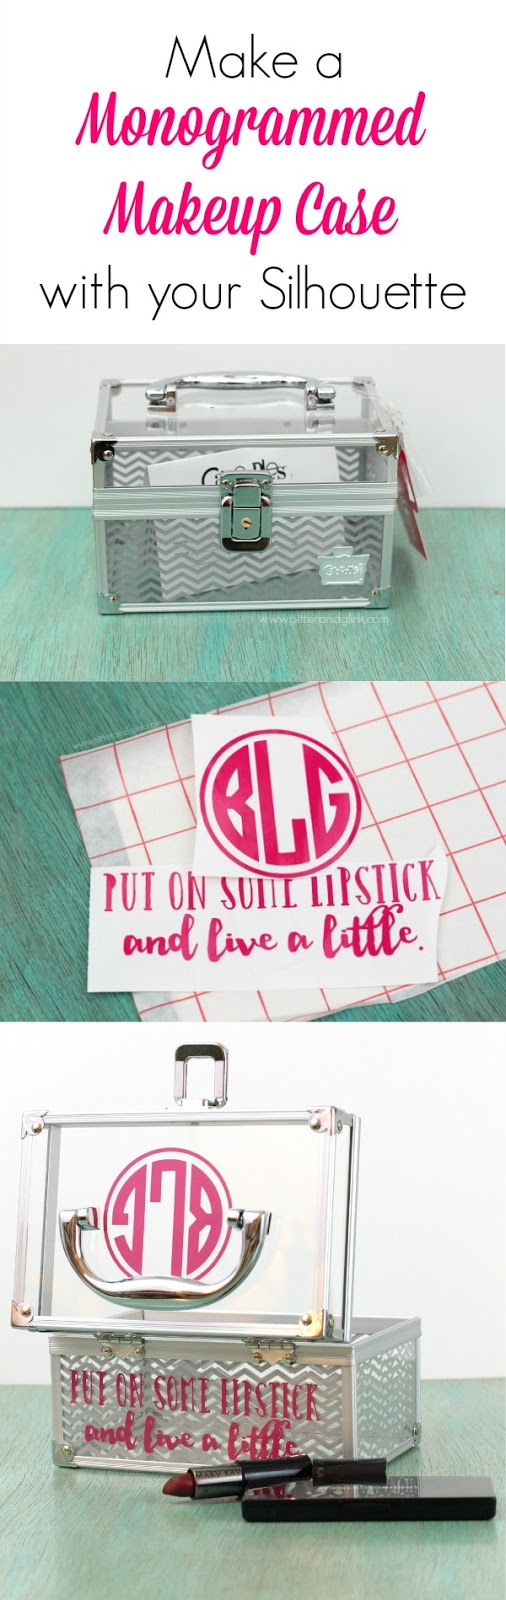 Personalize a plain makeup case with a vinyl monogram and quote.  A great Silhouette project!  www.pitterandglink.com